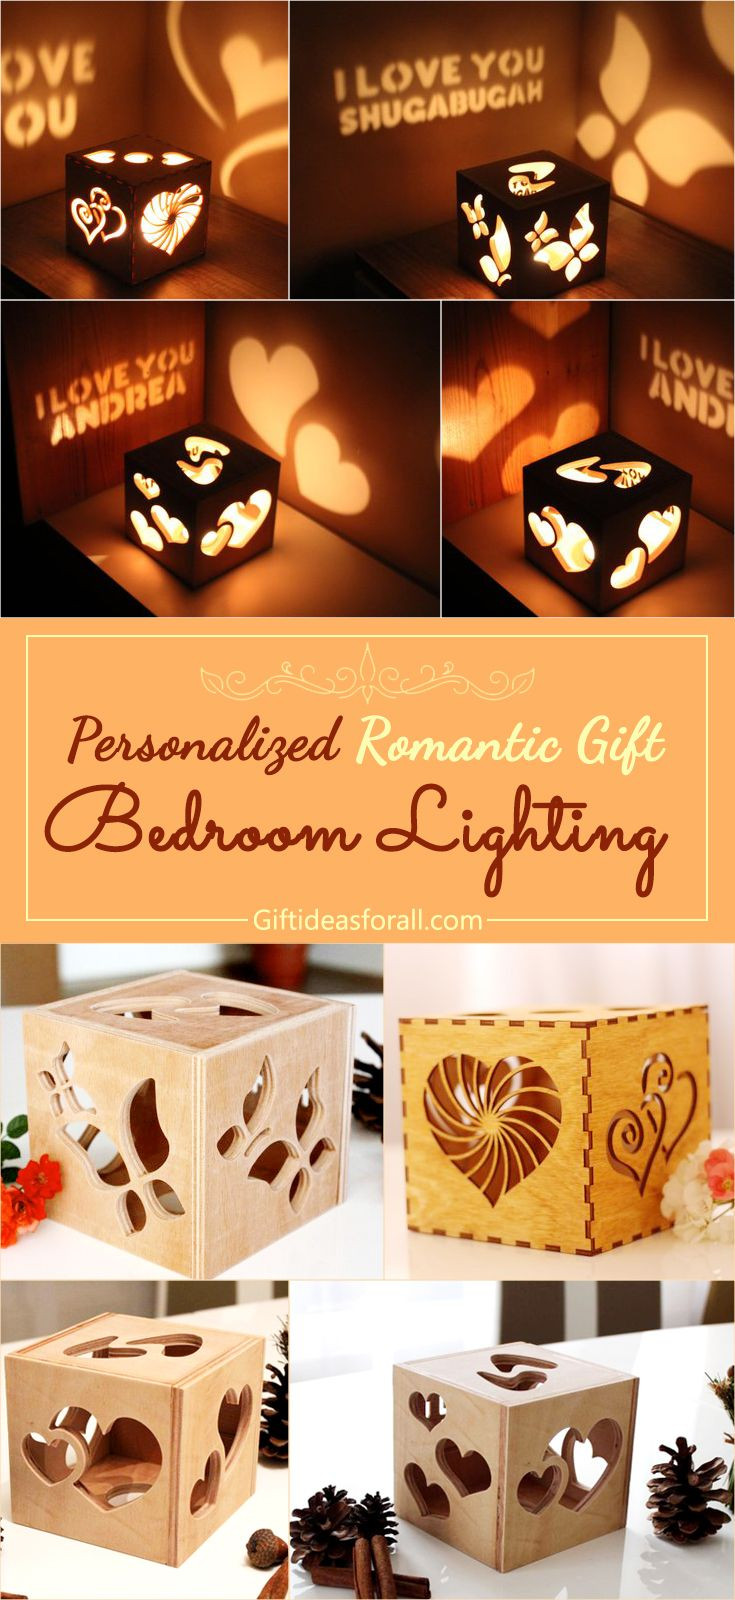 Creative Birthday Gift Ideas For Girlfriend
 Personalized romantic bedroom lighting Gifts Giftideas